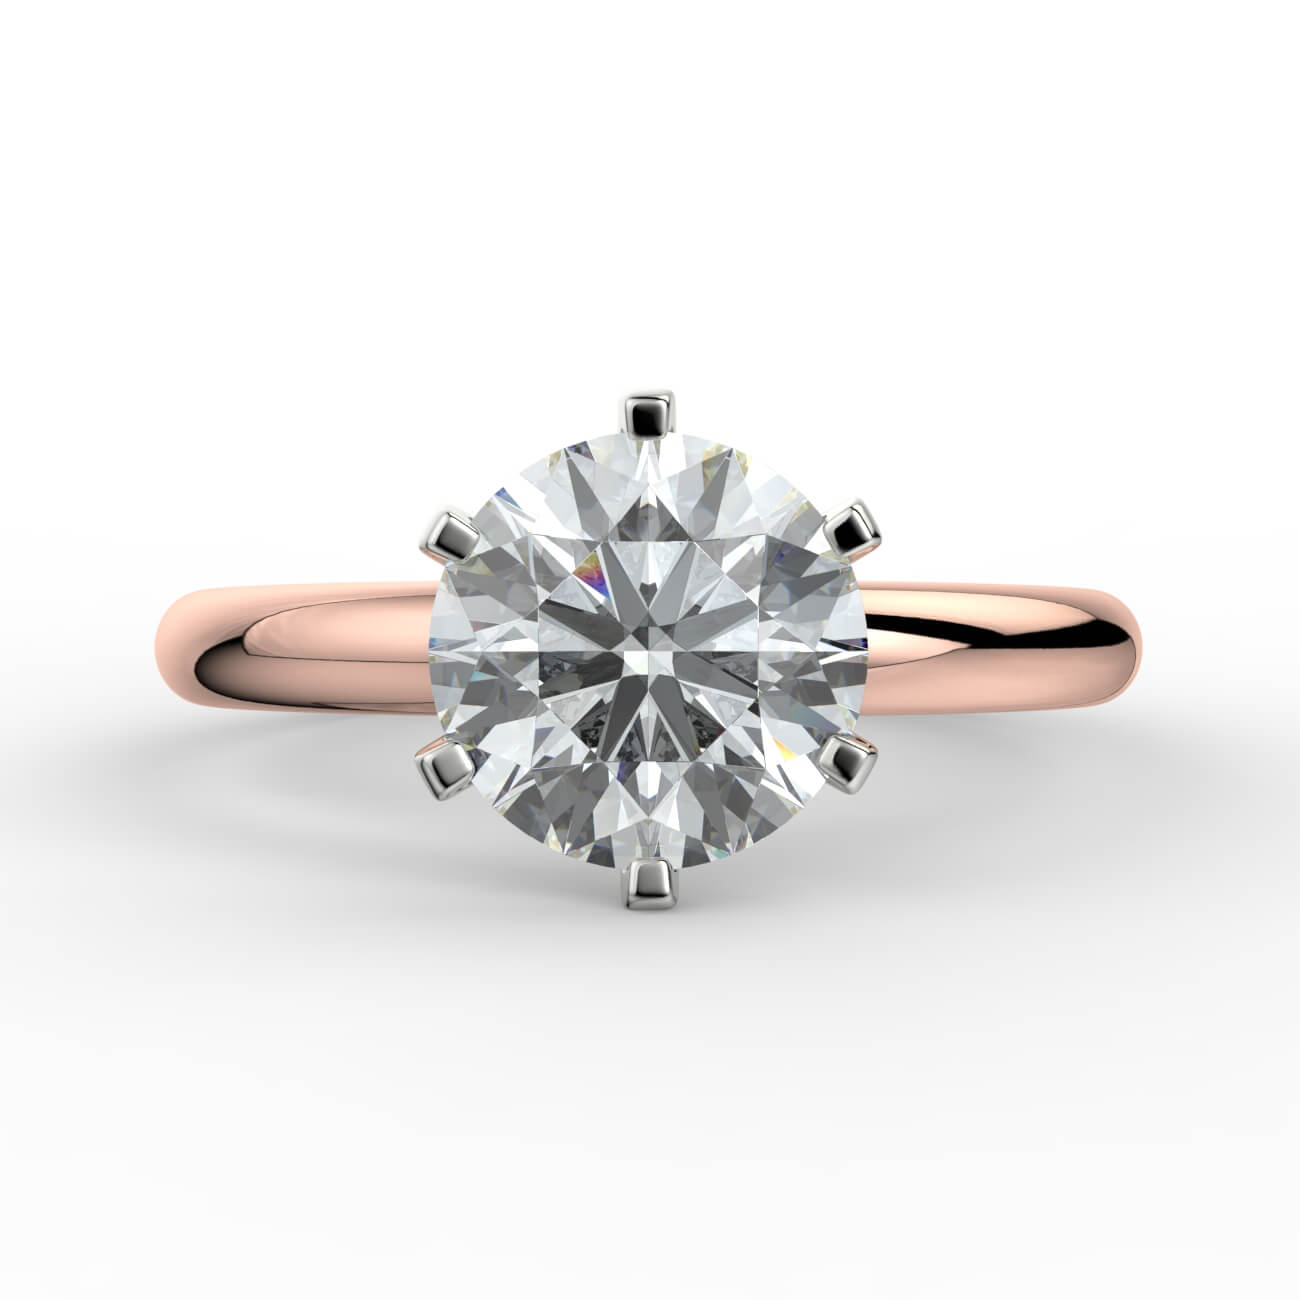 Solitaire diamond engagement ring in white and rose gold – Australian Diamond Network